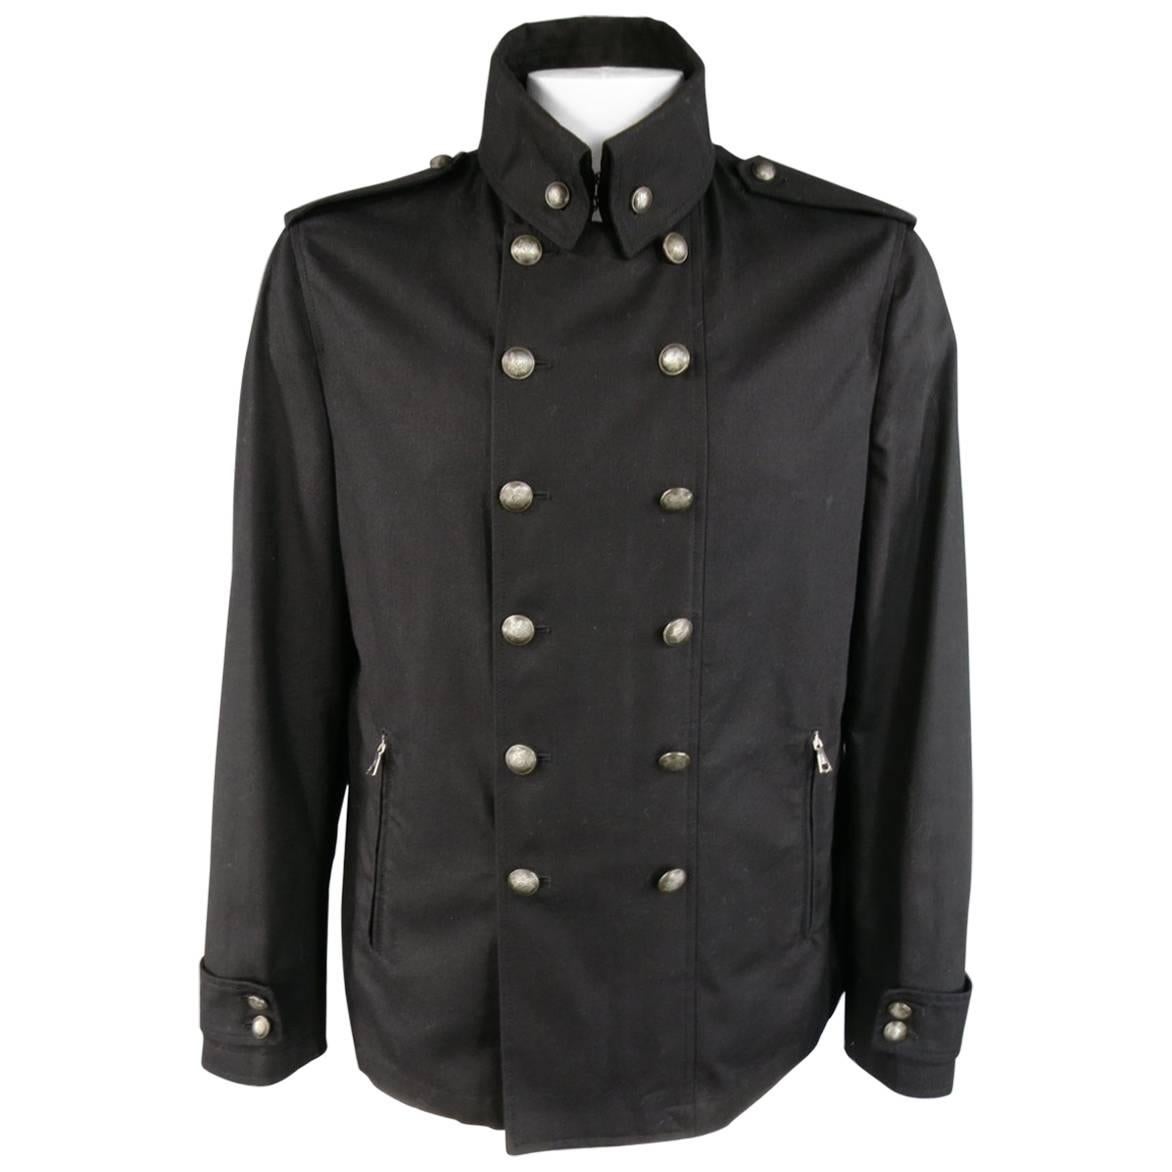 JOHN VARVATOS 44 Black Cotton Double Breasted Brass Buttons Military Jacket